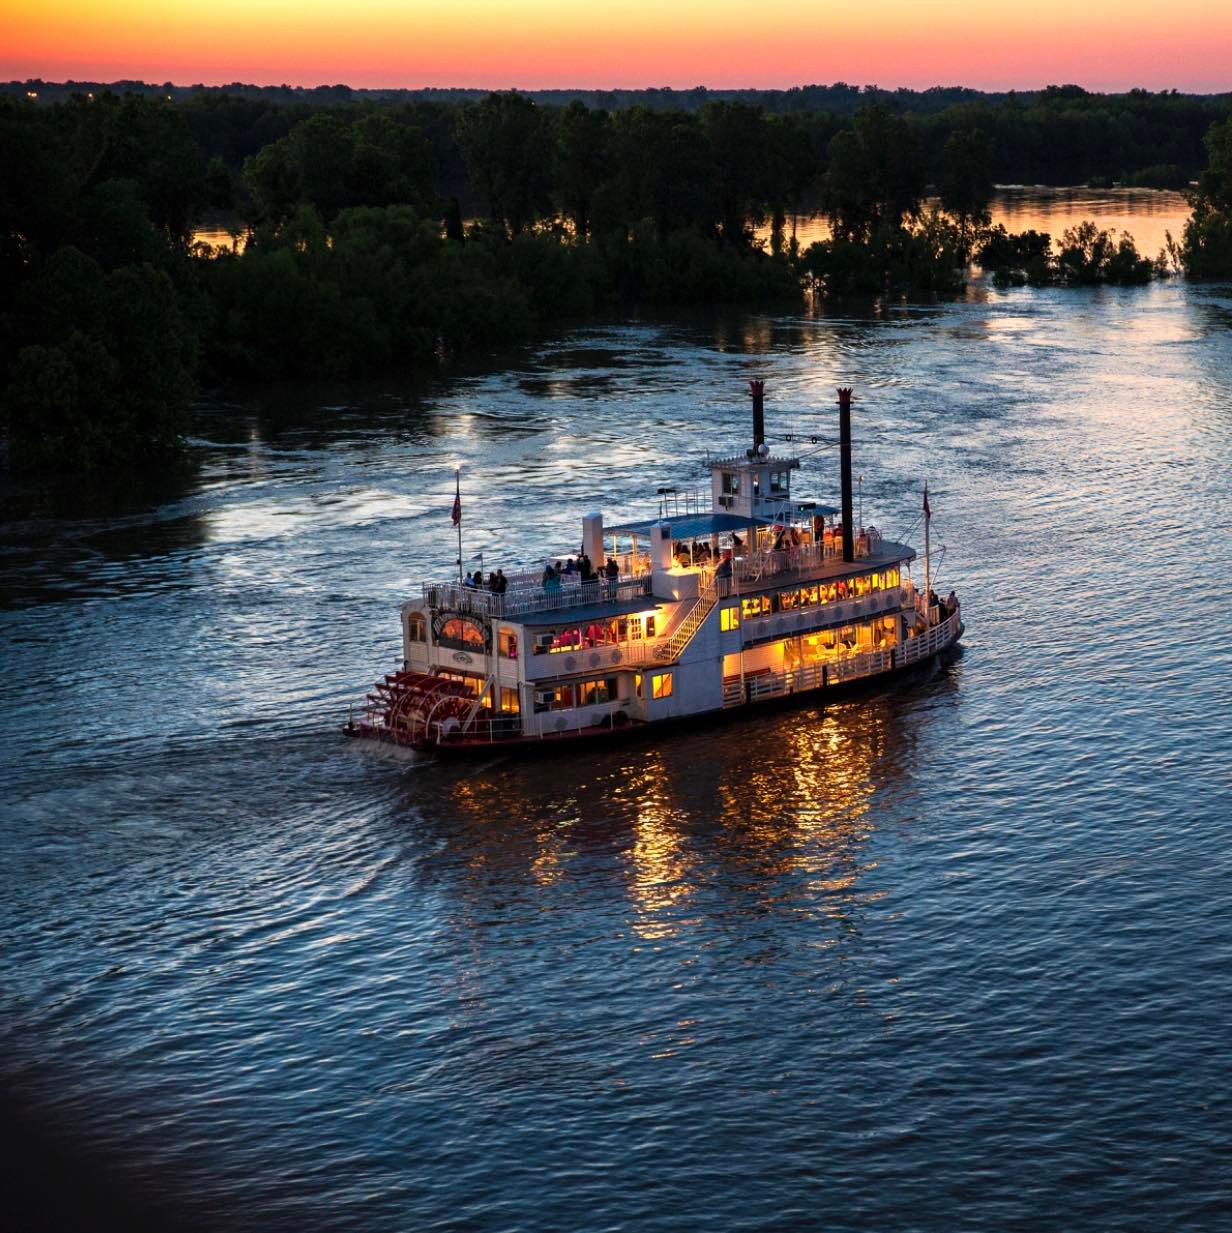 Memphis Riverboat on a Sunset Cruise along the Mississippi River